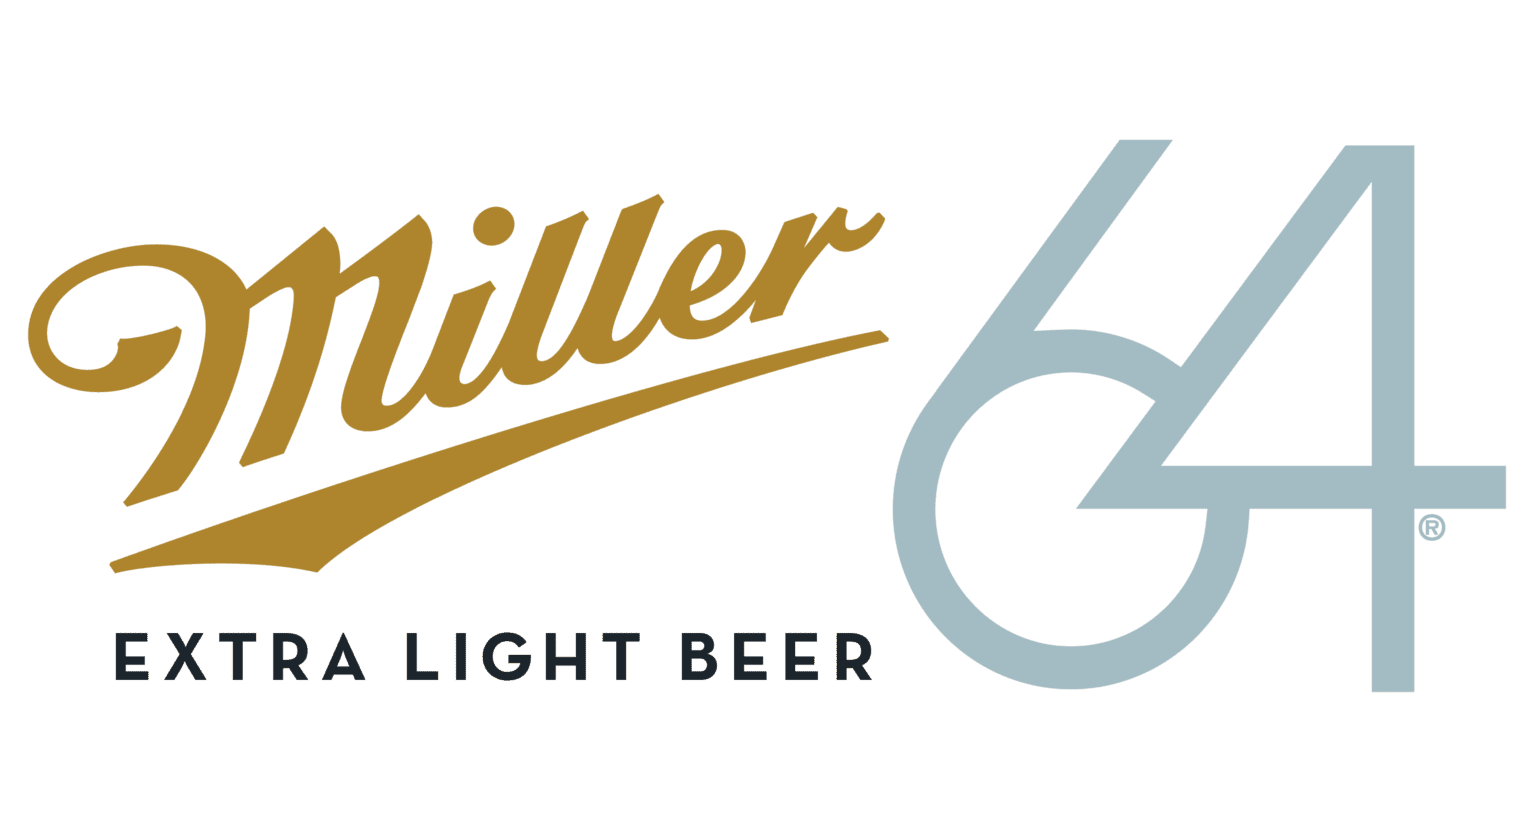 A green background with the miller 6 logo.